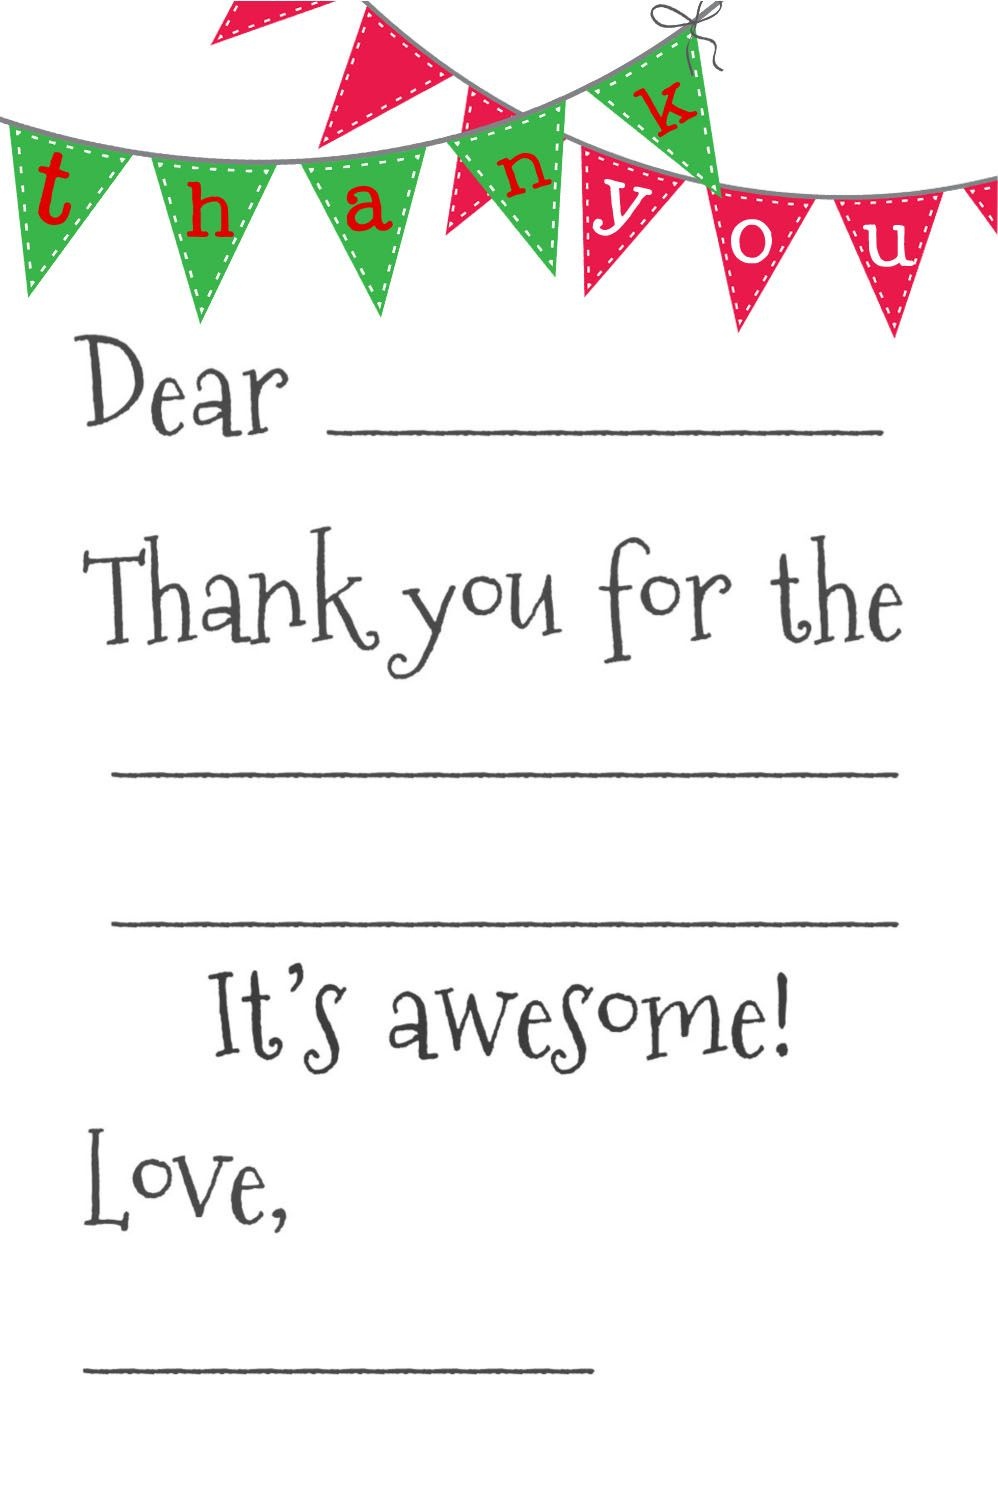 Free Fill-In-The-Blank Thank-You Cards | Printables | Free Thank You - Fill In The Blank Thank You Cards Printable Free